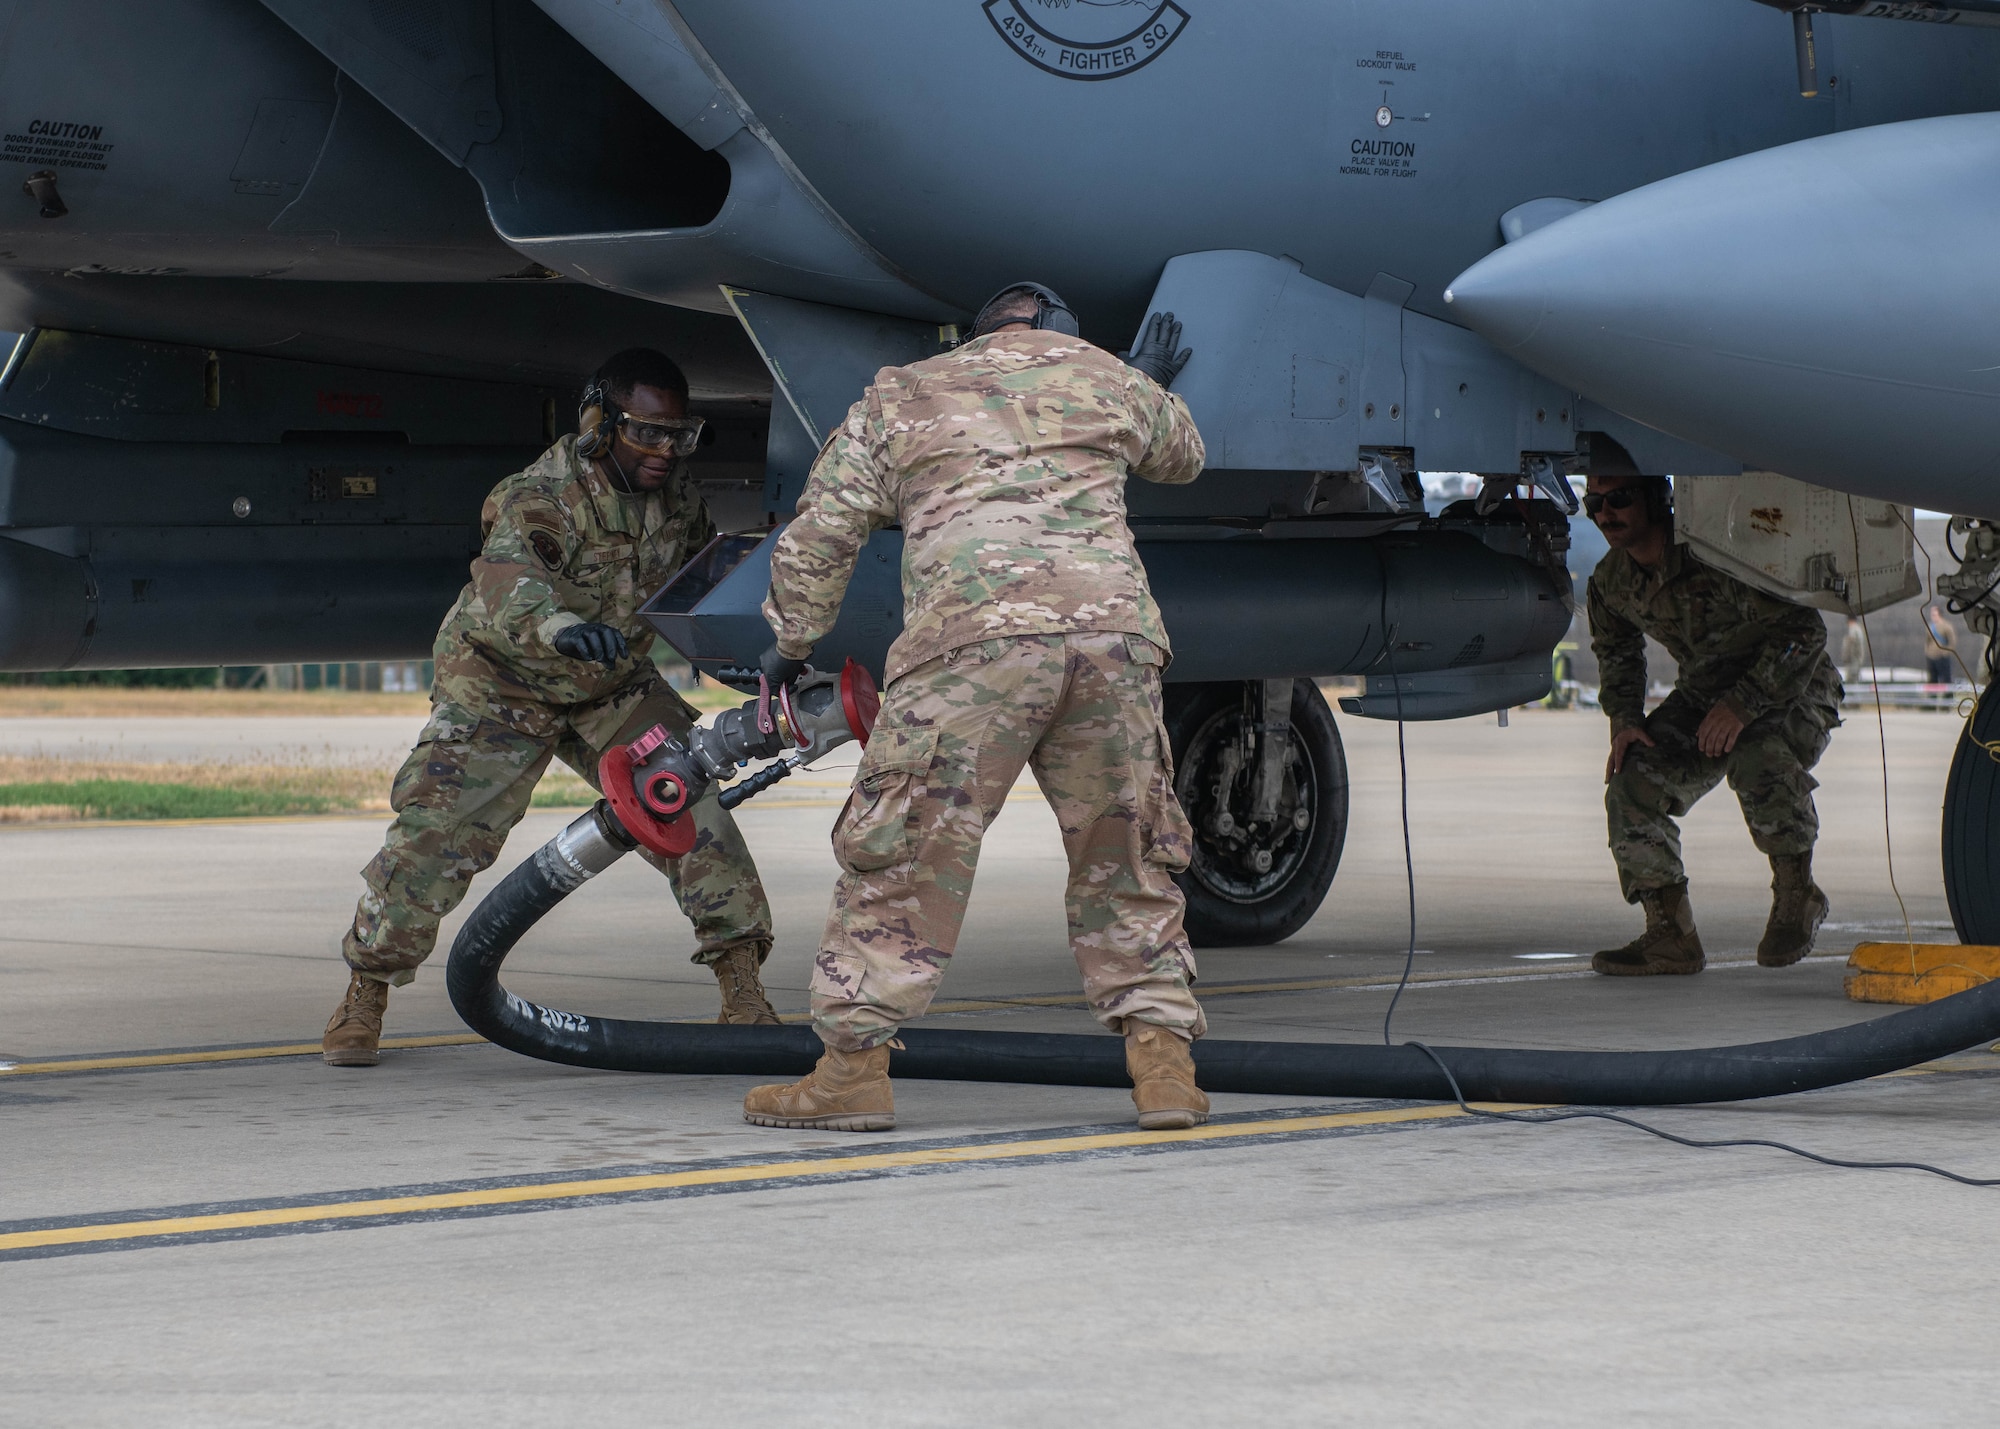 U.S. Air Force Airmen assigned to the 435th Contingency Response Squadron out of Ramstein Air Base, Germany, conduct hot-pit refueling training with the 48th Maintenance Squadron at Royal Air Force Lakenheath, England, July 27, 2022. The training aids in expanding the squadron’s Agile Combat Employment capabilities. (U.S. Air Force photo by Airman 1st Class Olivia Gibson)